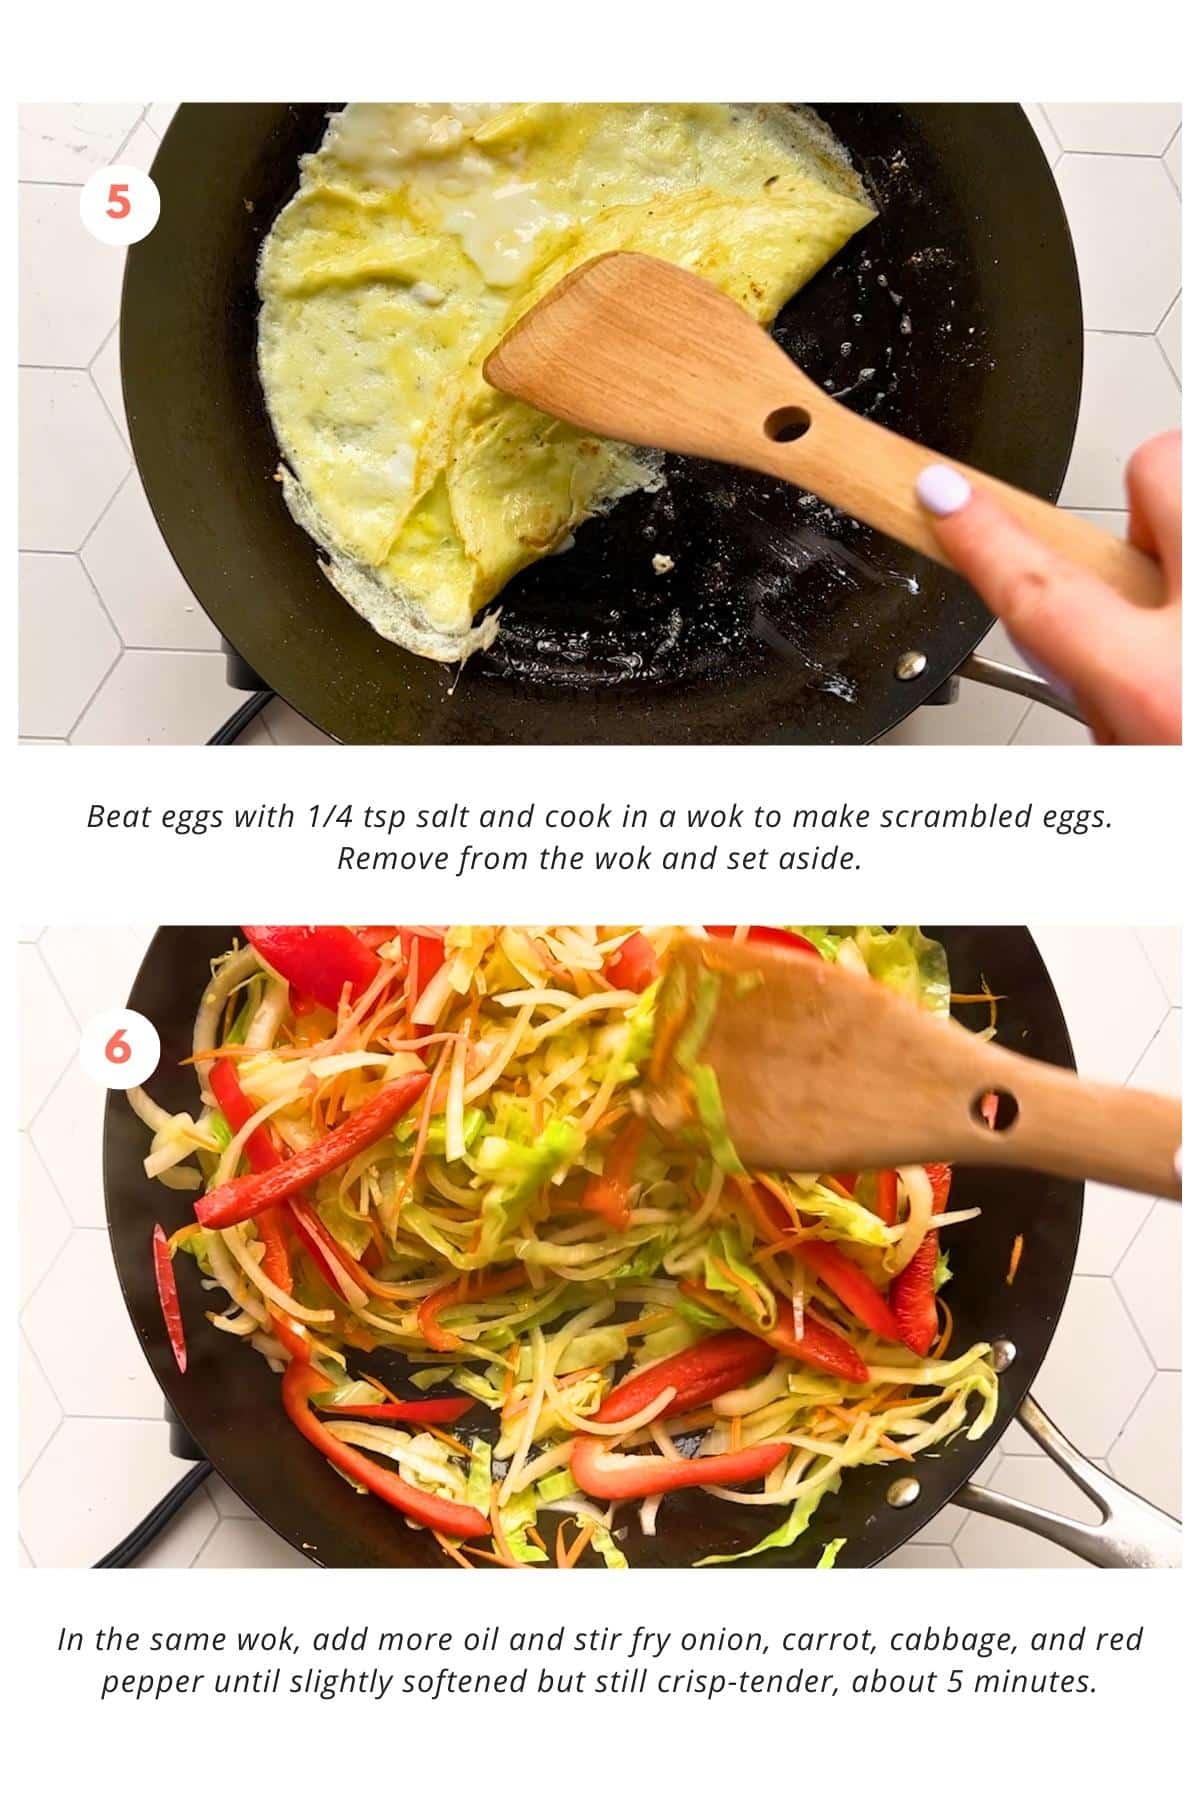 Eggs are beaten with 1/4 tsp salt and cooked in a wok to make scrambled eggs. The scrambled eggs are then removed from the wok and set aside. In the same wok, more oil is added and onion, carrot, cabbage, and red pepper are stir-fried until slightly softened but still crisp-tender, about 5 minutes.